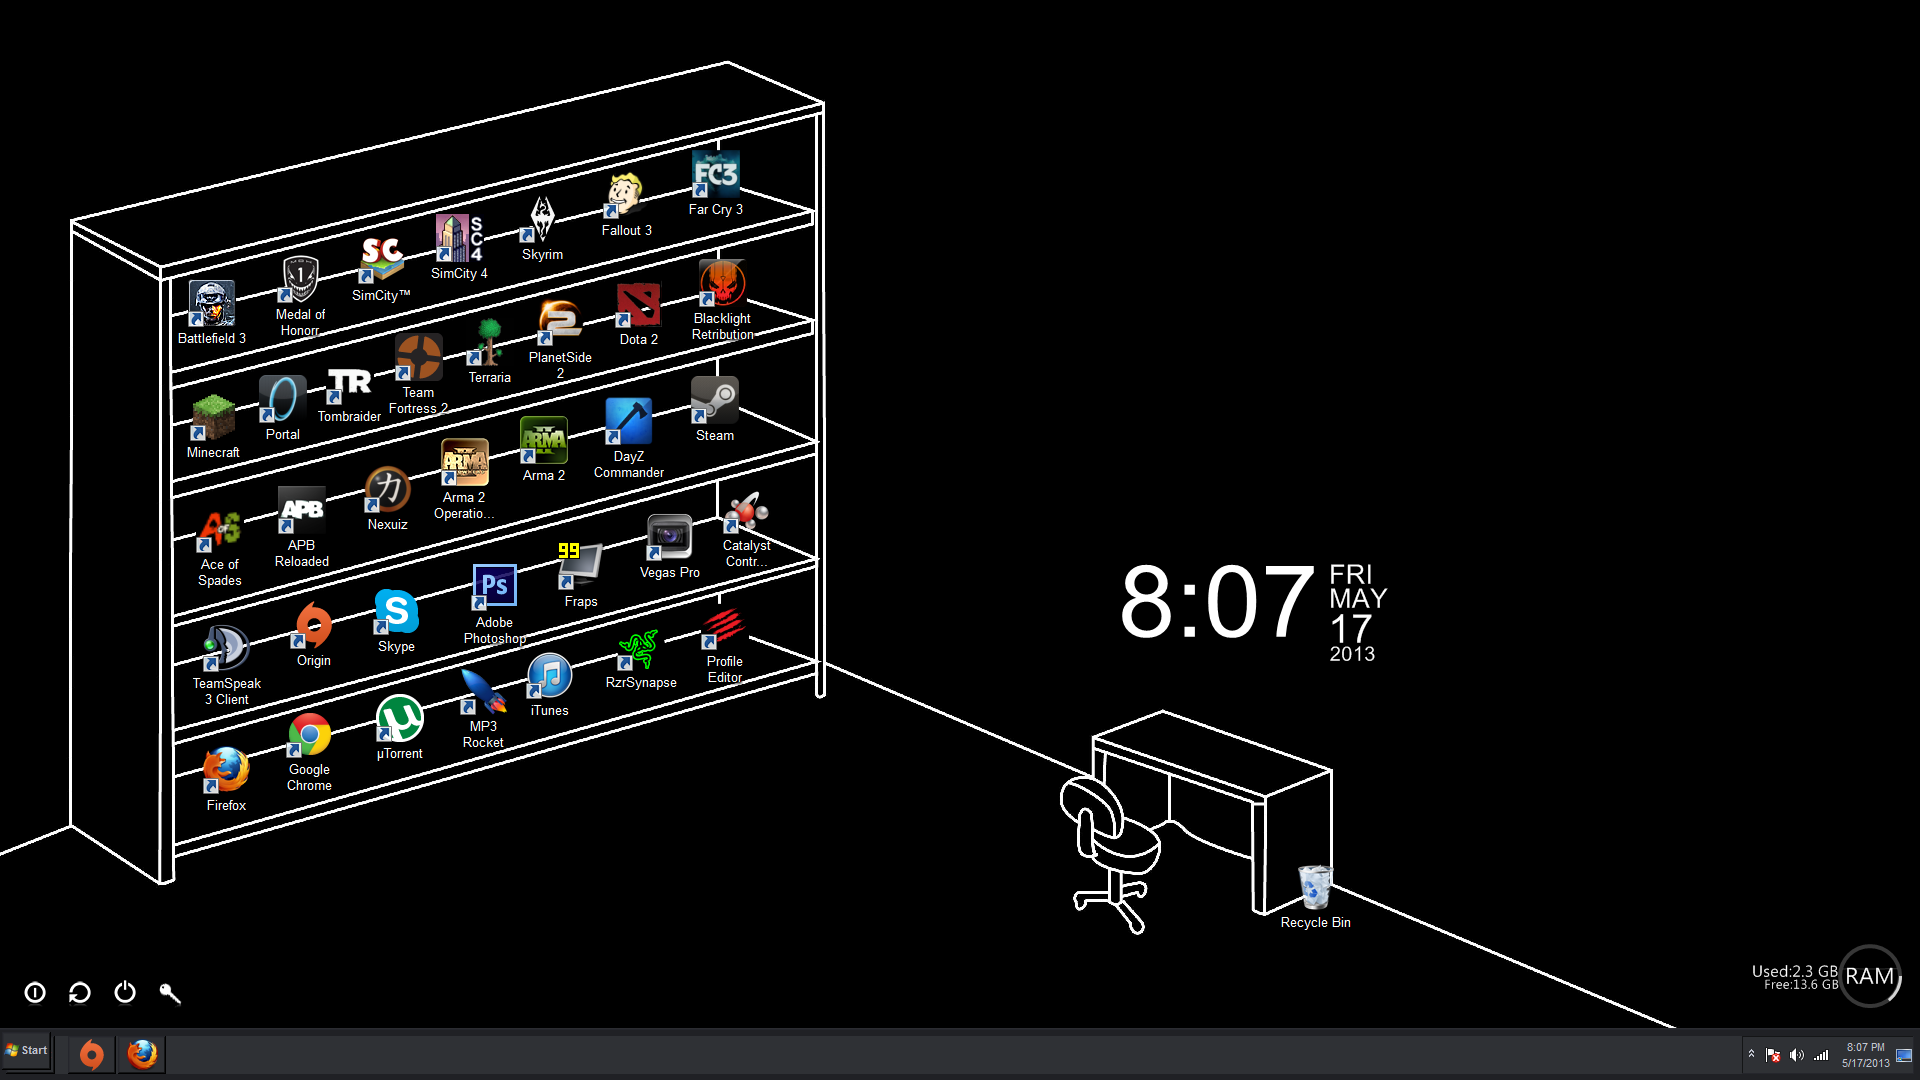 Arrange Your Desktop Icons On The Shelf Example In Comments